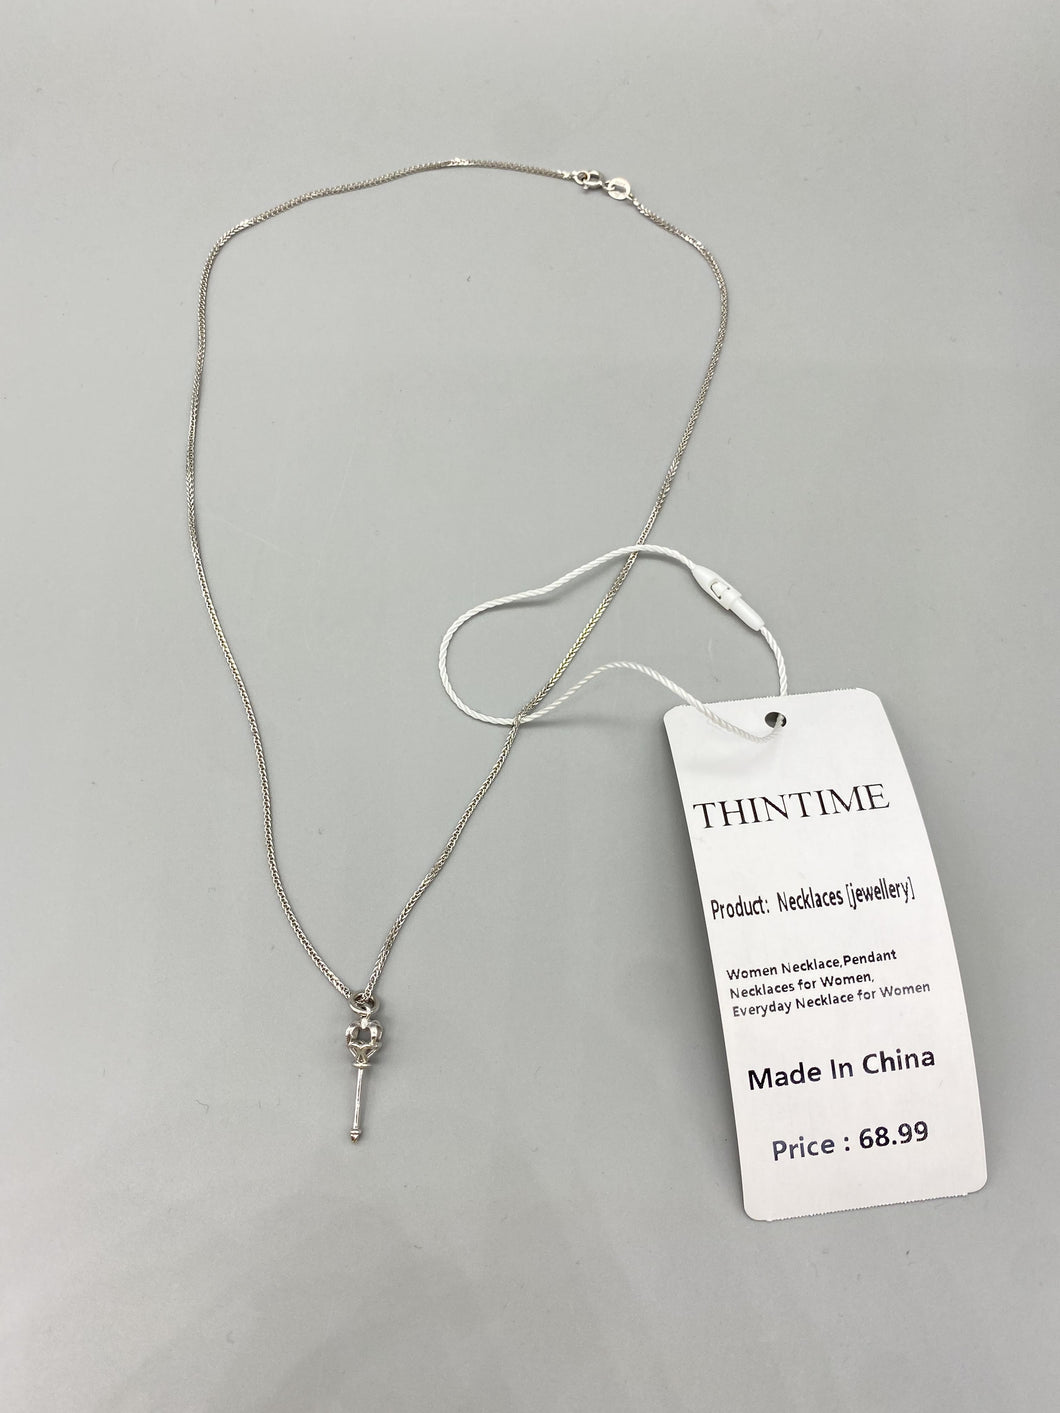 THINTIME Necklaces [jewellery],Women's jewelry,Scepter Magic Key Personalized Pendant Necklace,925 Sterling Silver Thin Cable Link Chain Necklace ,Curb Link Chain Necklace, Men & Women, Super Thin & Strong - Friendly Price & Quality 20Inc